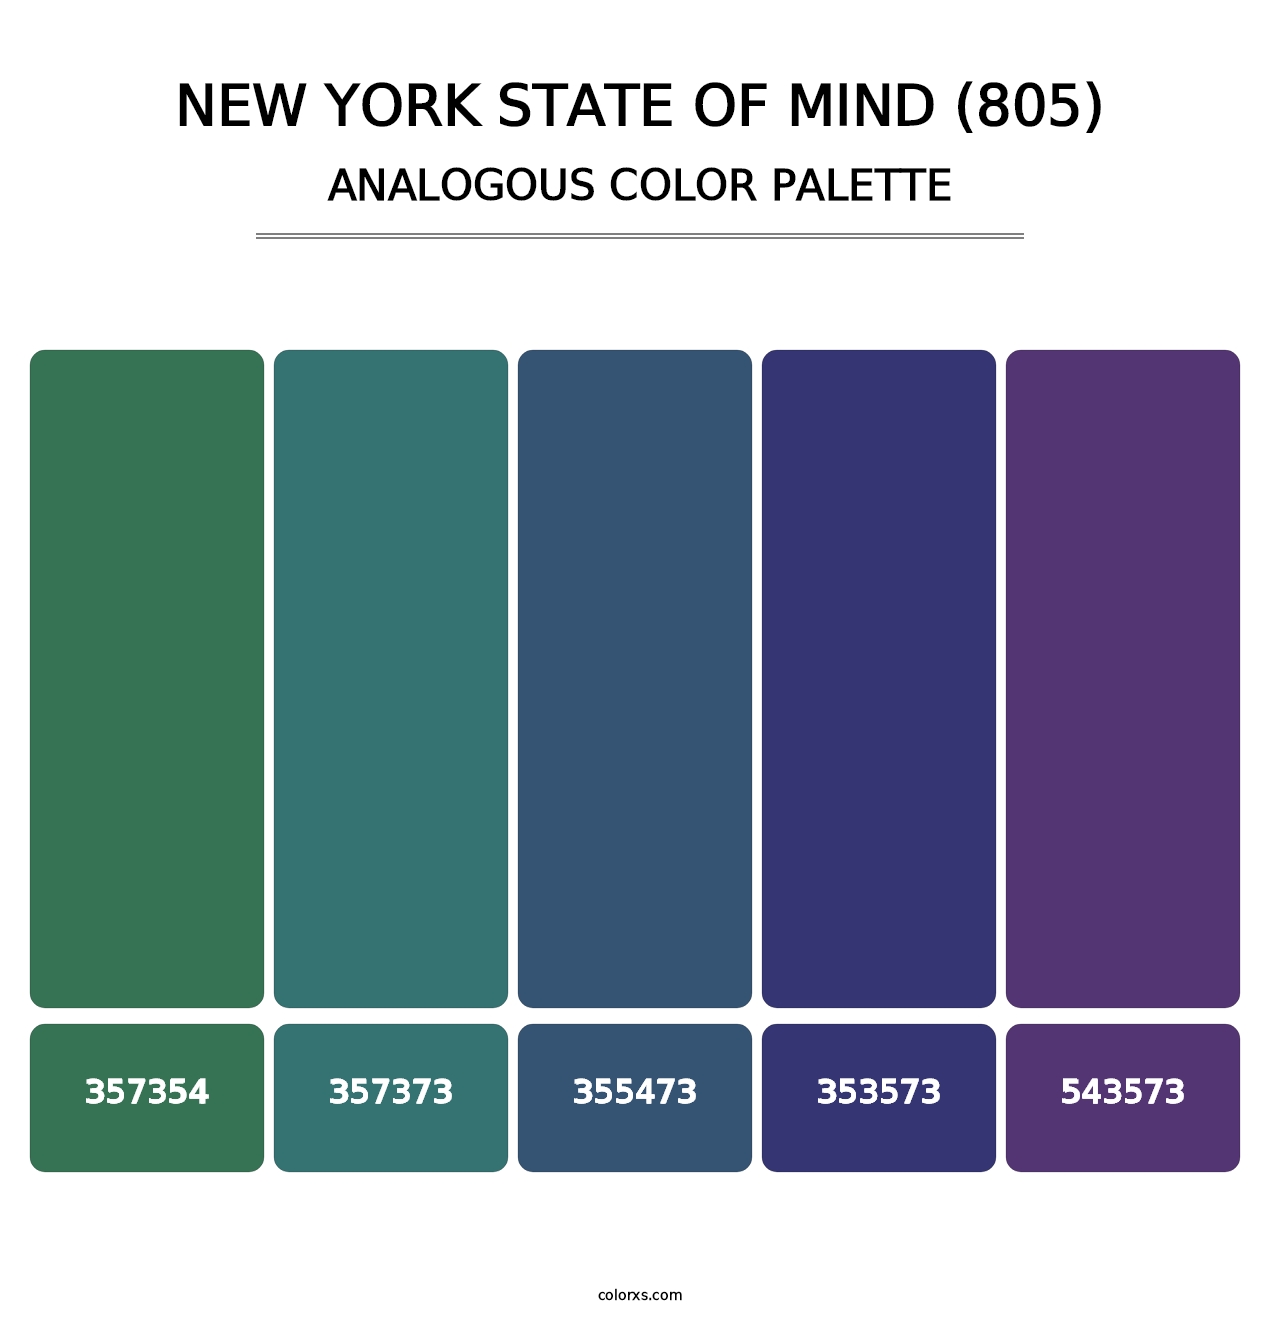 New York State of Mind (805) - Analogous Color Palette